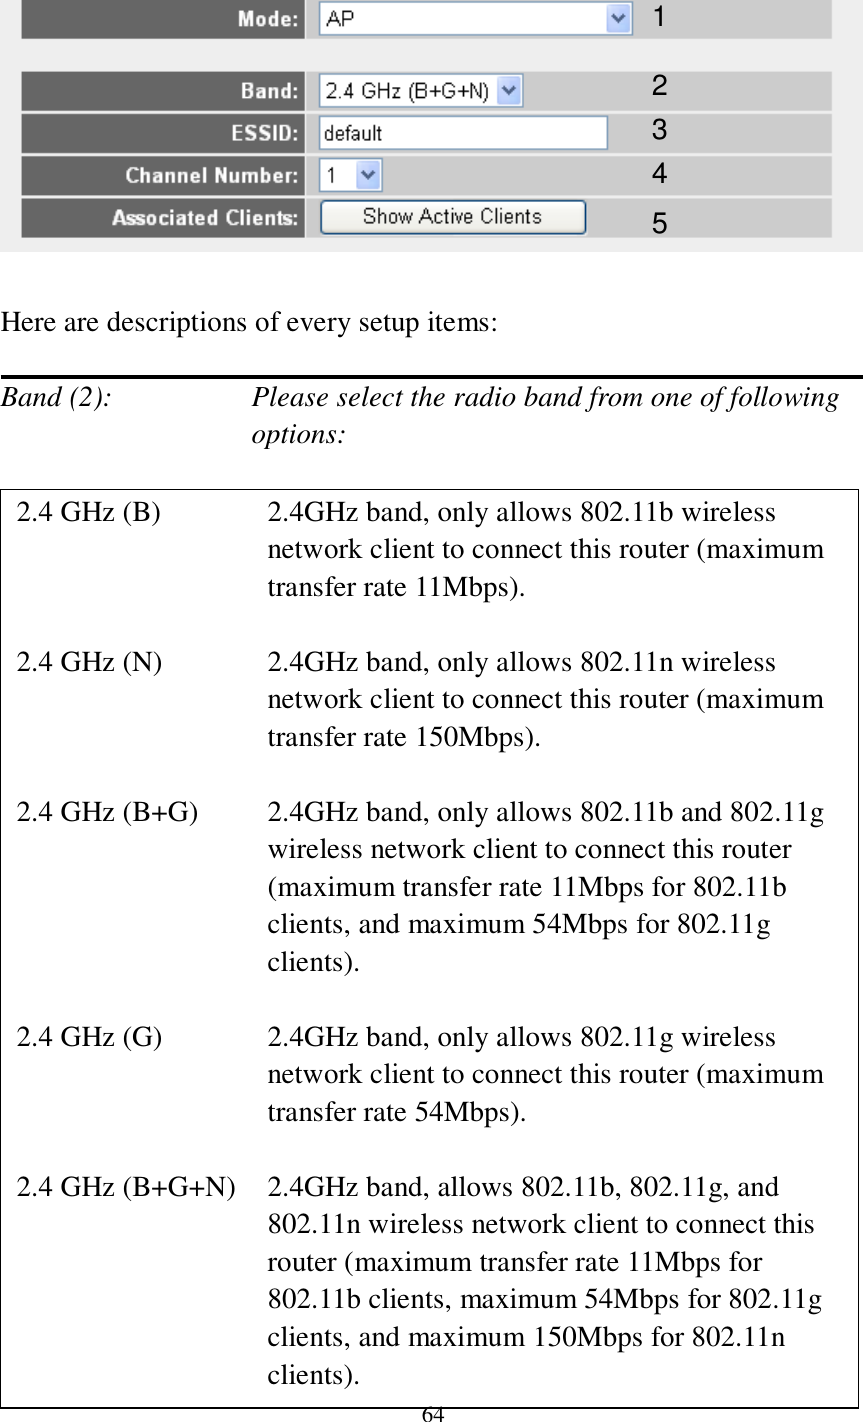 64    Here are descriptions of every setup items:  Band (2):    Please select the radio band from one of following options:                         1 2 3 4 2.4 GHz (B)  2.4GHz band, only allows 802.11b wireless network client to connect this router (maximum transfer rate 11Mbps).  2.4 GHz (N)  2.4GHz band, only allows 802.11n wireless network client to connect this router (maximum transfer rate 150Mbps).  2.4 GHz (B+G)    2.4GHz band, only allows 802.11b and 802.11g wireless network client to connect this router (maximum transfer rate 11Mbps for 802.11b clients, and maximum 54Mbps for 802.11g clients).  2.4 GHz (G)    2.4GHz band, only allows 802.11g wireless network client to connect this router (maximum transfer rate 54Mbps).  2.4 GHz (B+G+N)    2.4GHz band, allows 802.11b, 802.11g, and 802.11n wireless network client to connect this router (maximum transfer rate 11Mbps for 802.11b clients, maximum 54Mbps for 802.11g clients, and maximum 150Mbps for 802.11n clients).   5 